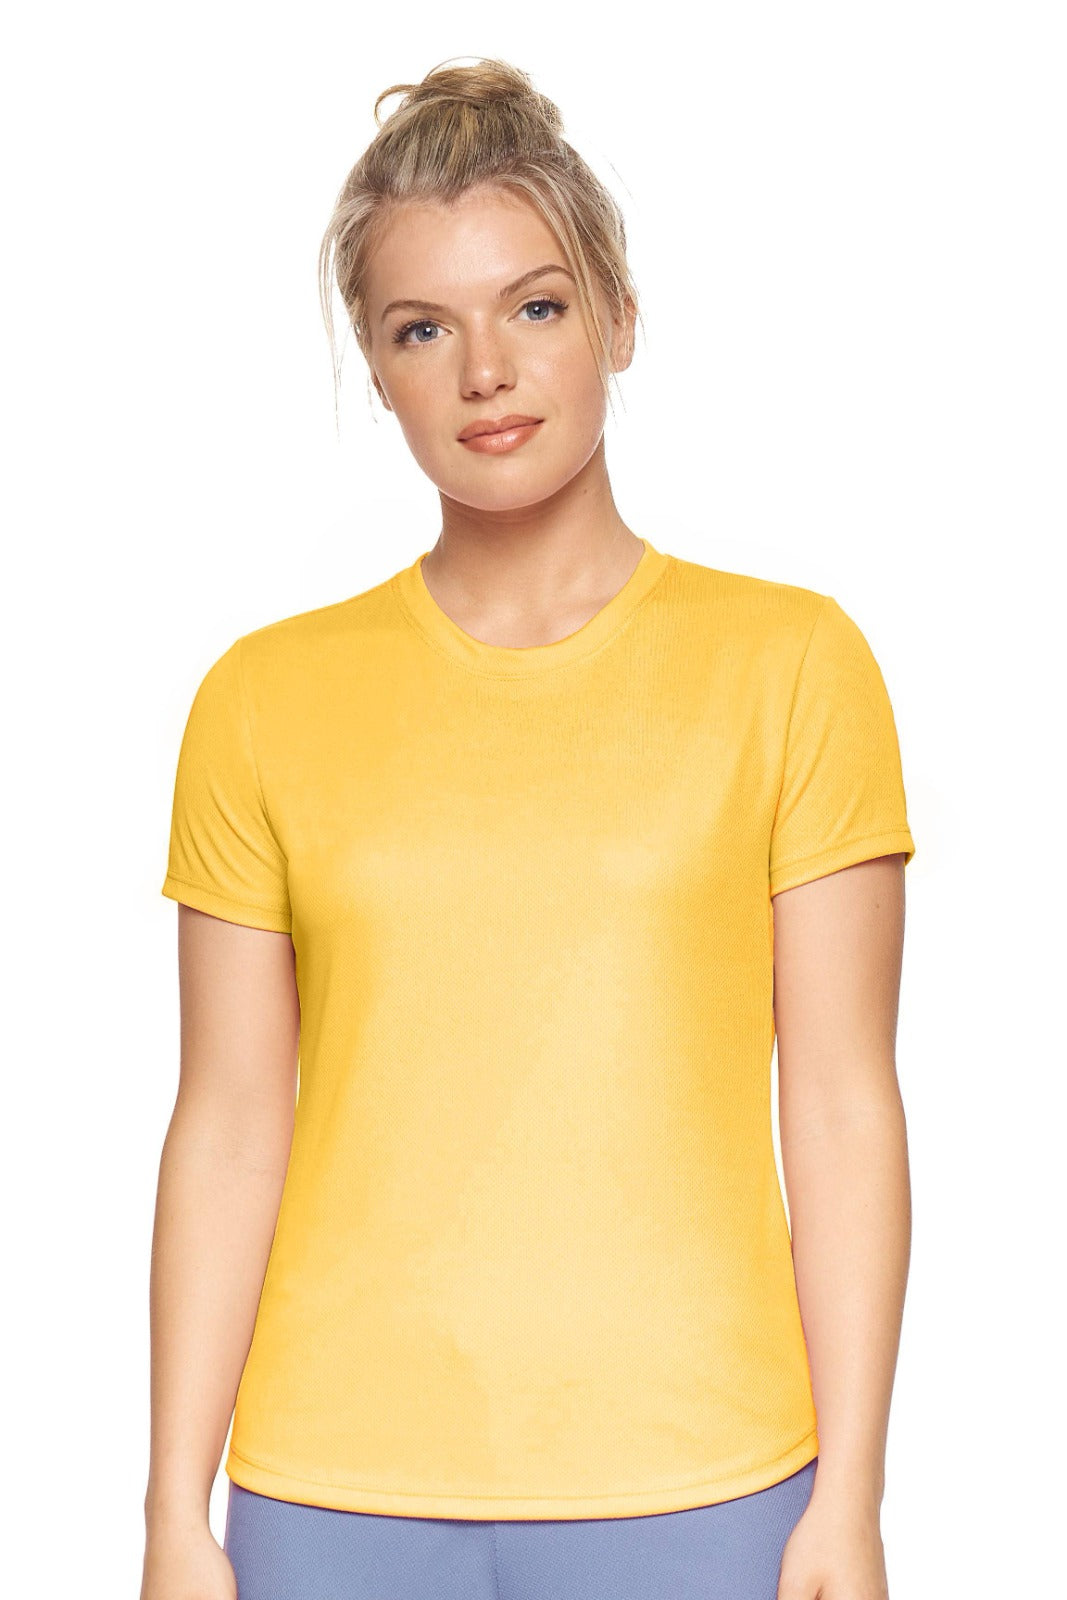 Expert Aparel Retail Women's Activewear Sportswear Oxymesh Tec Tee T-shirt Made in USA gold#color_gold